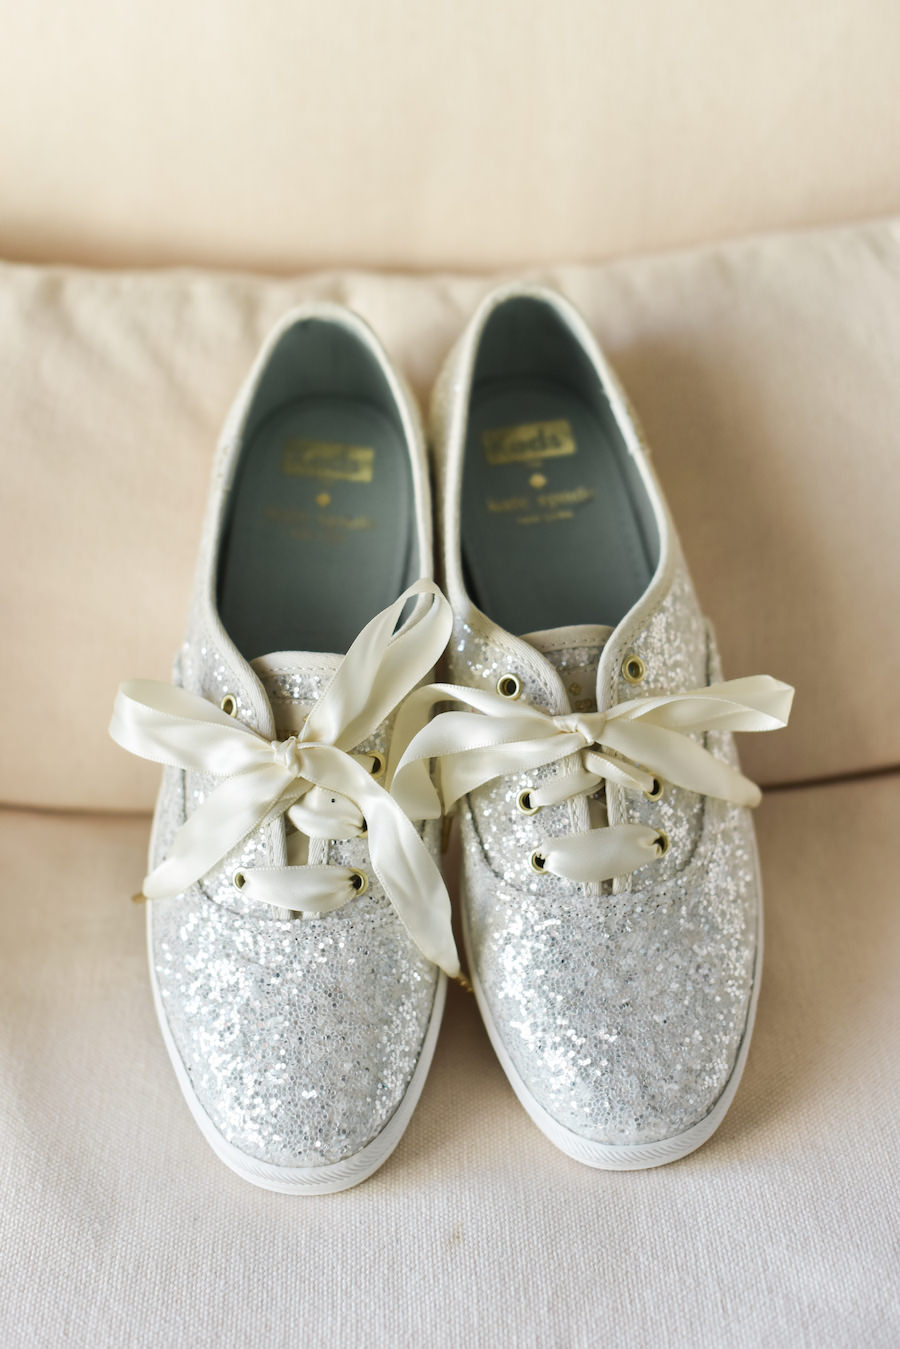 Silver Glitter Kate Spade for Keds Bridal Wedding Day Shoes